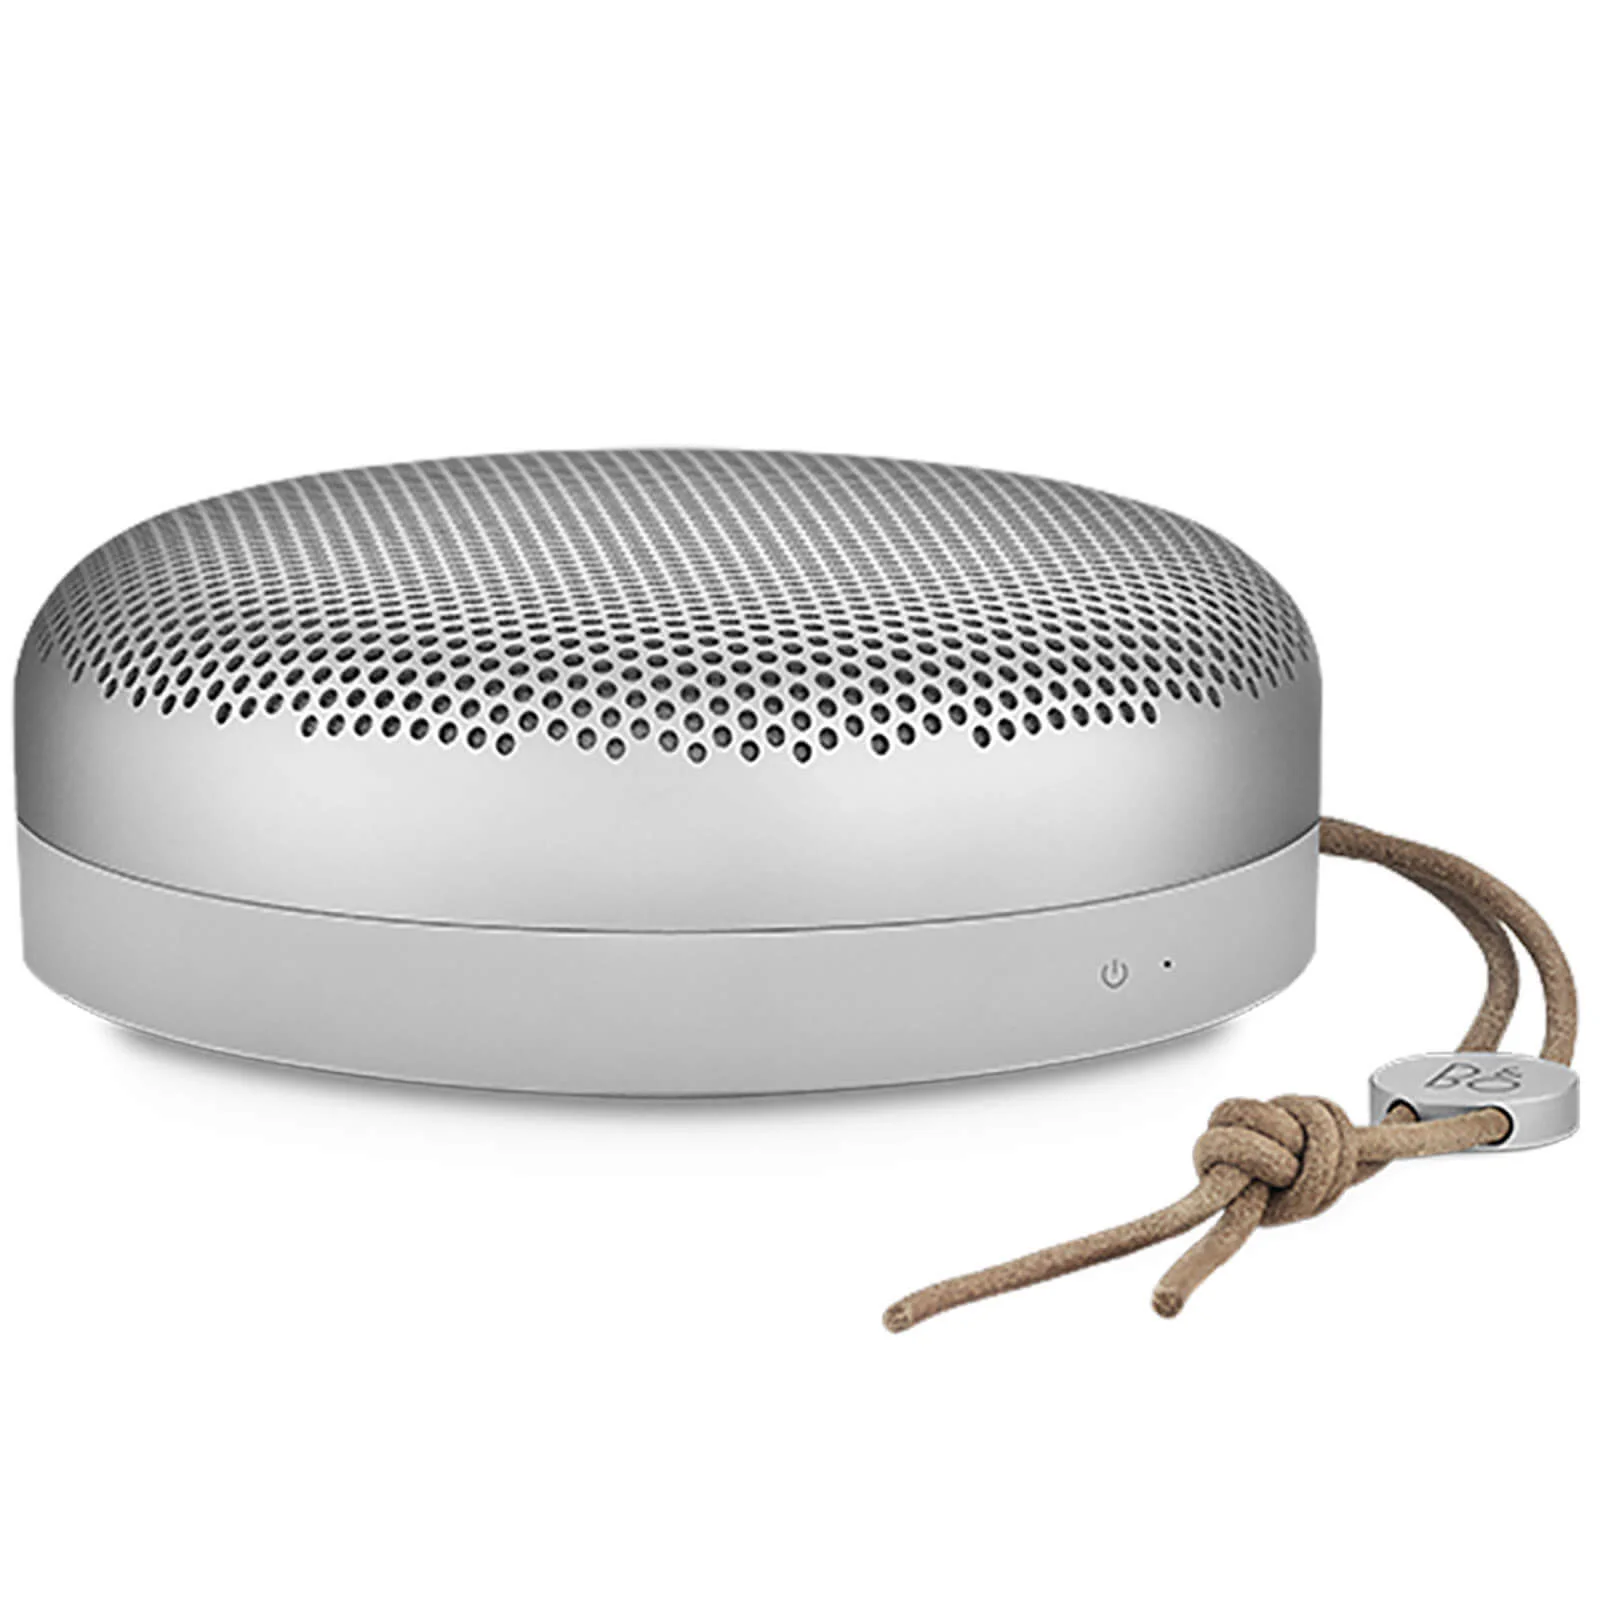 Bang & Olufsen BeoPlay A1 1.0 Portable Bluetooth Speaker - Natural Image 1